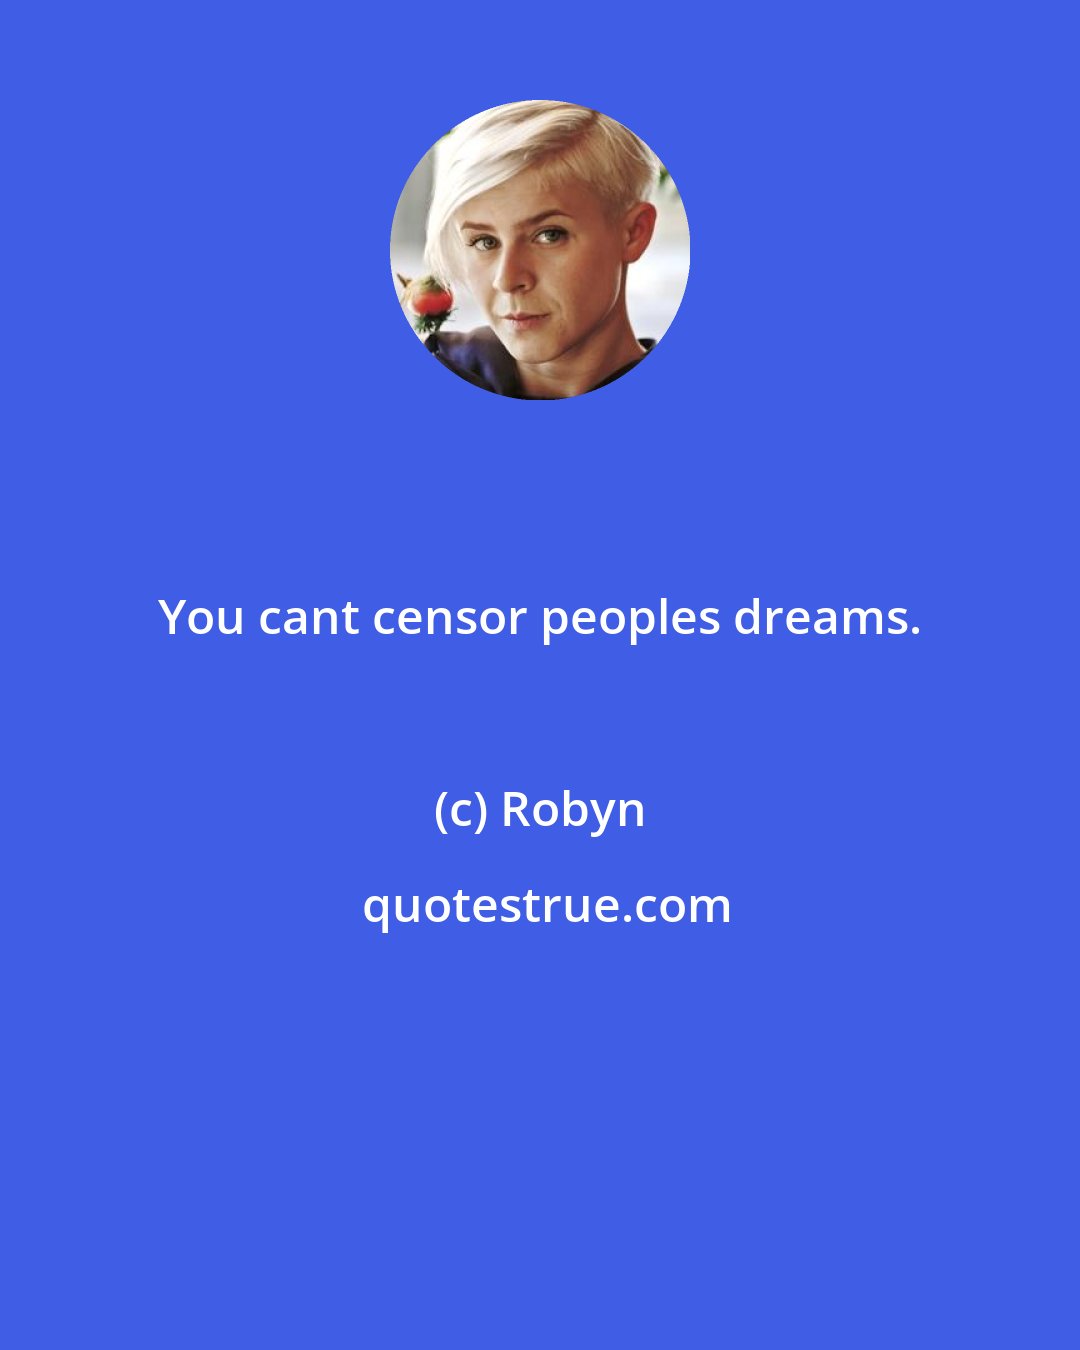 Robyn: You cant censor peoples dreams.